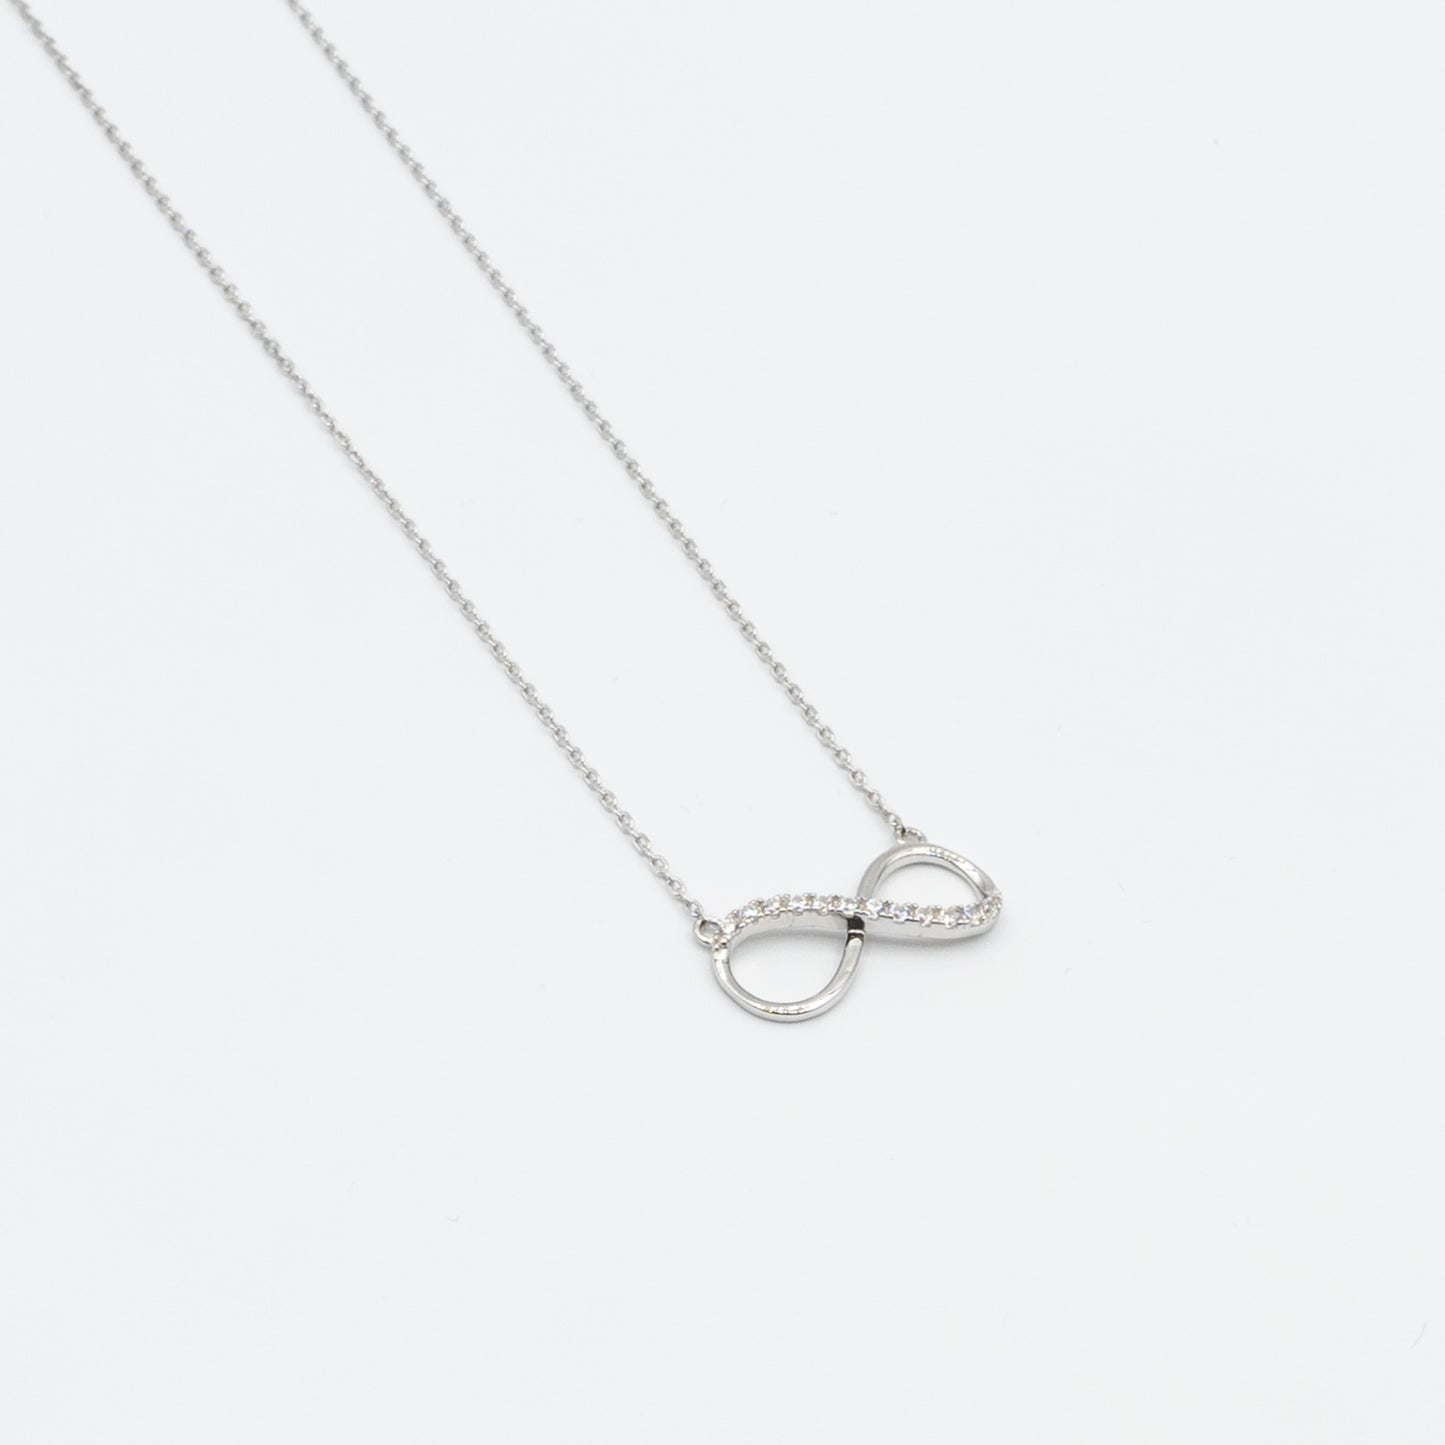 RIVER - sterling silver infinity necklace